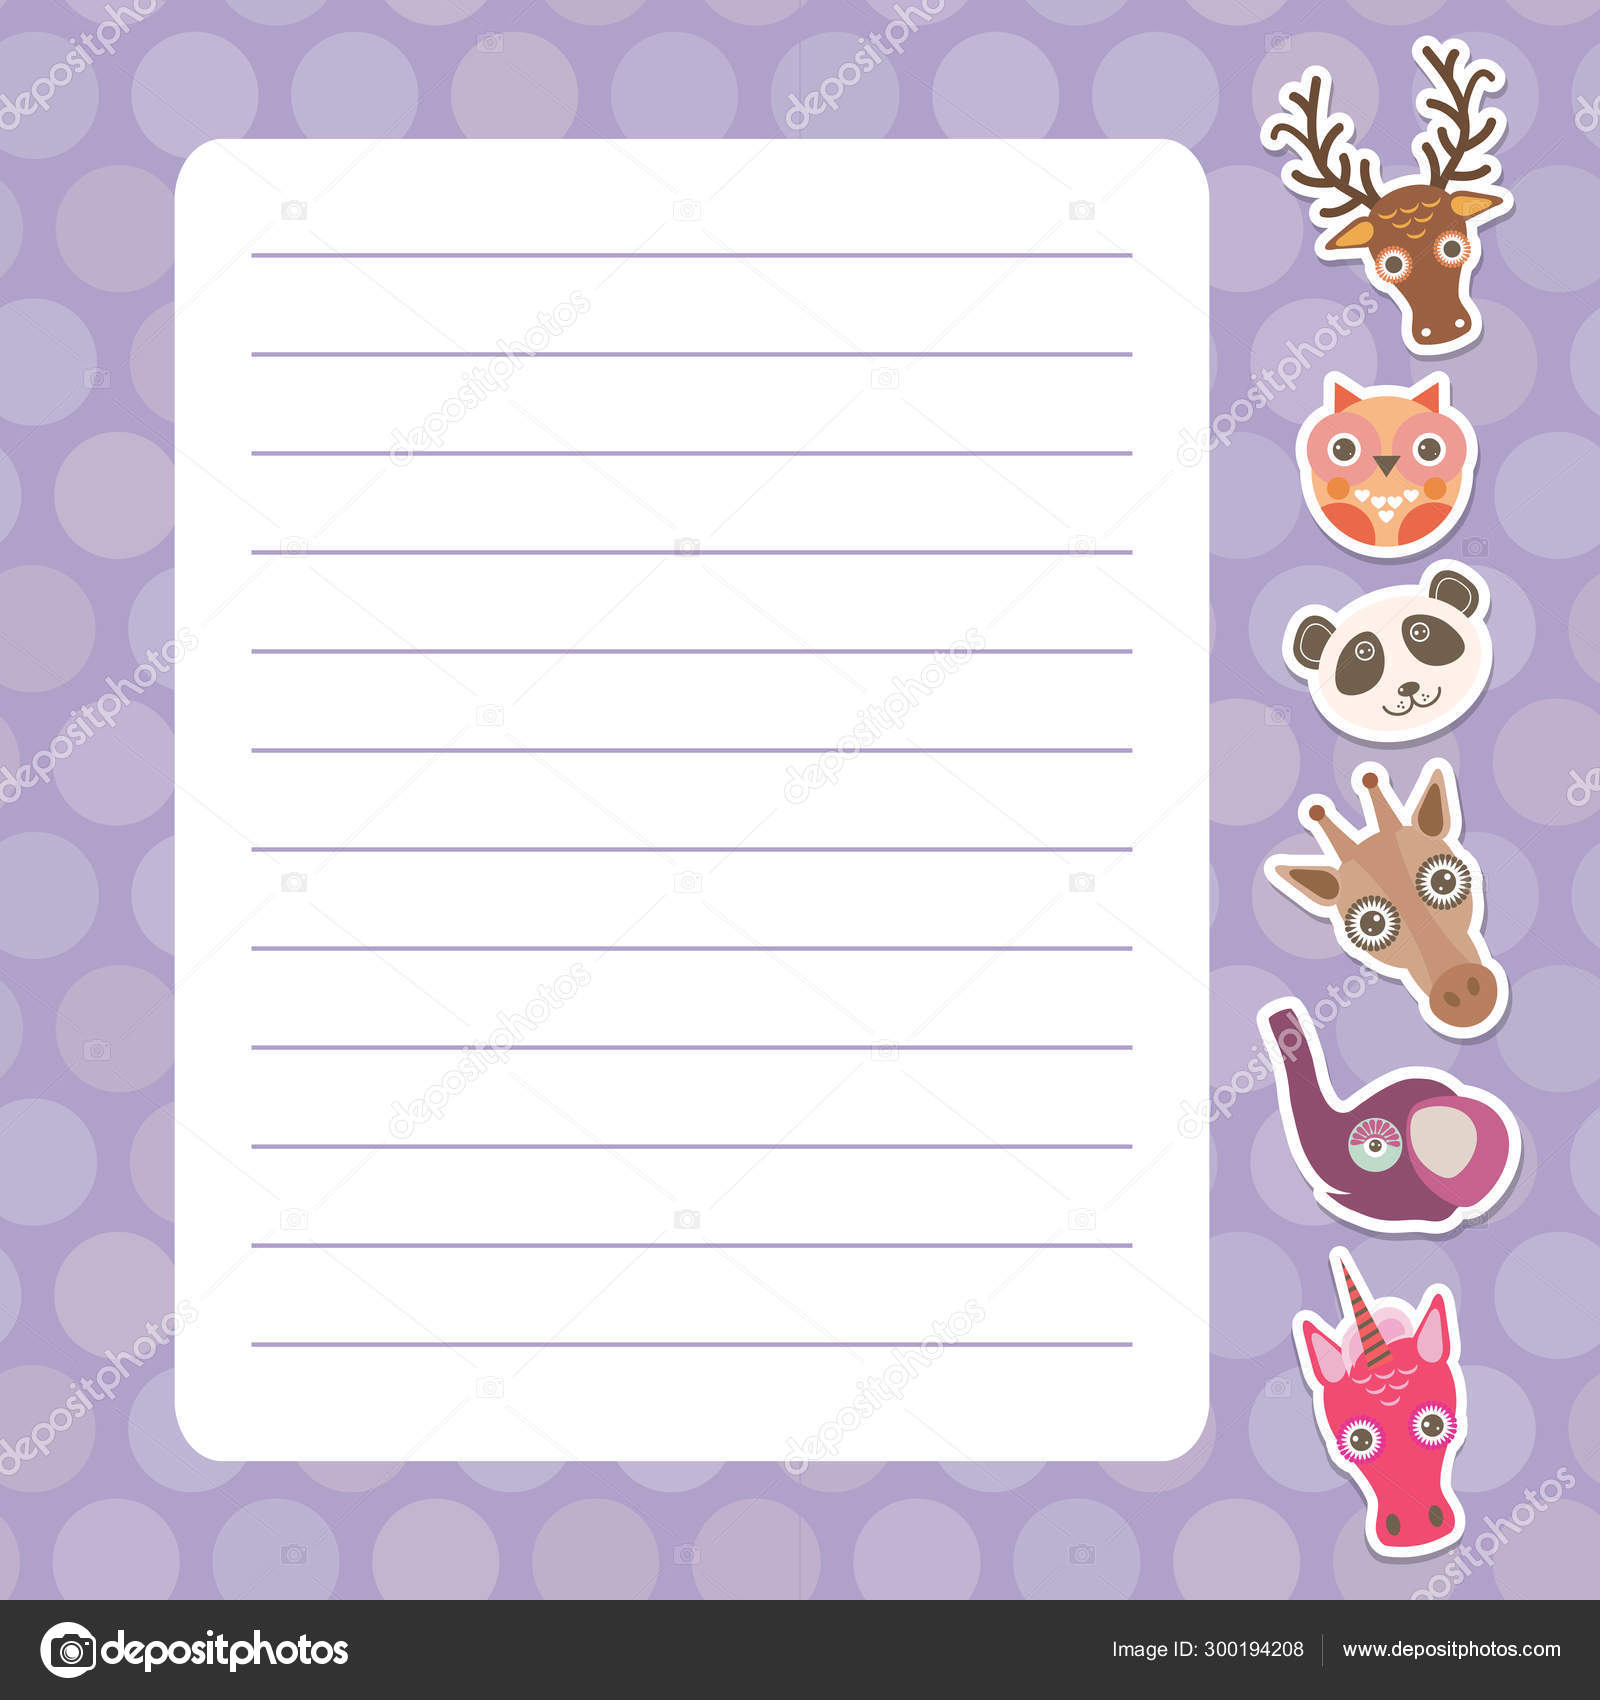 Kawaii Notebook Page Template Stock Illustration - Download Image